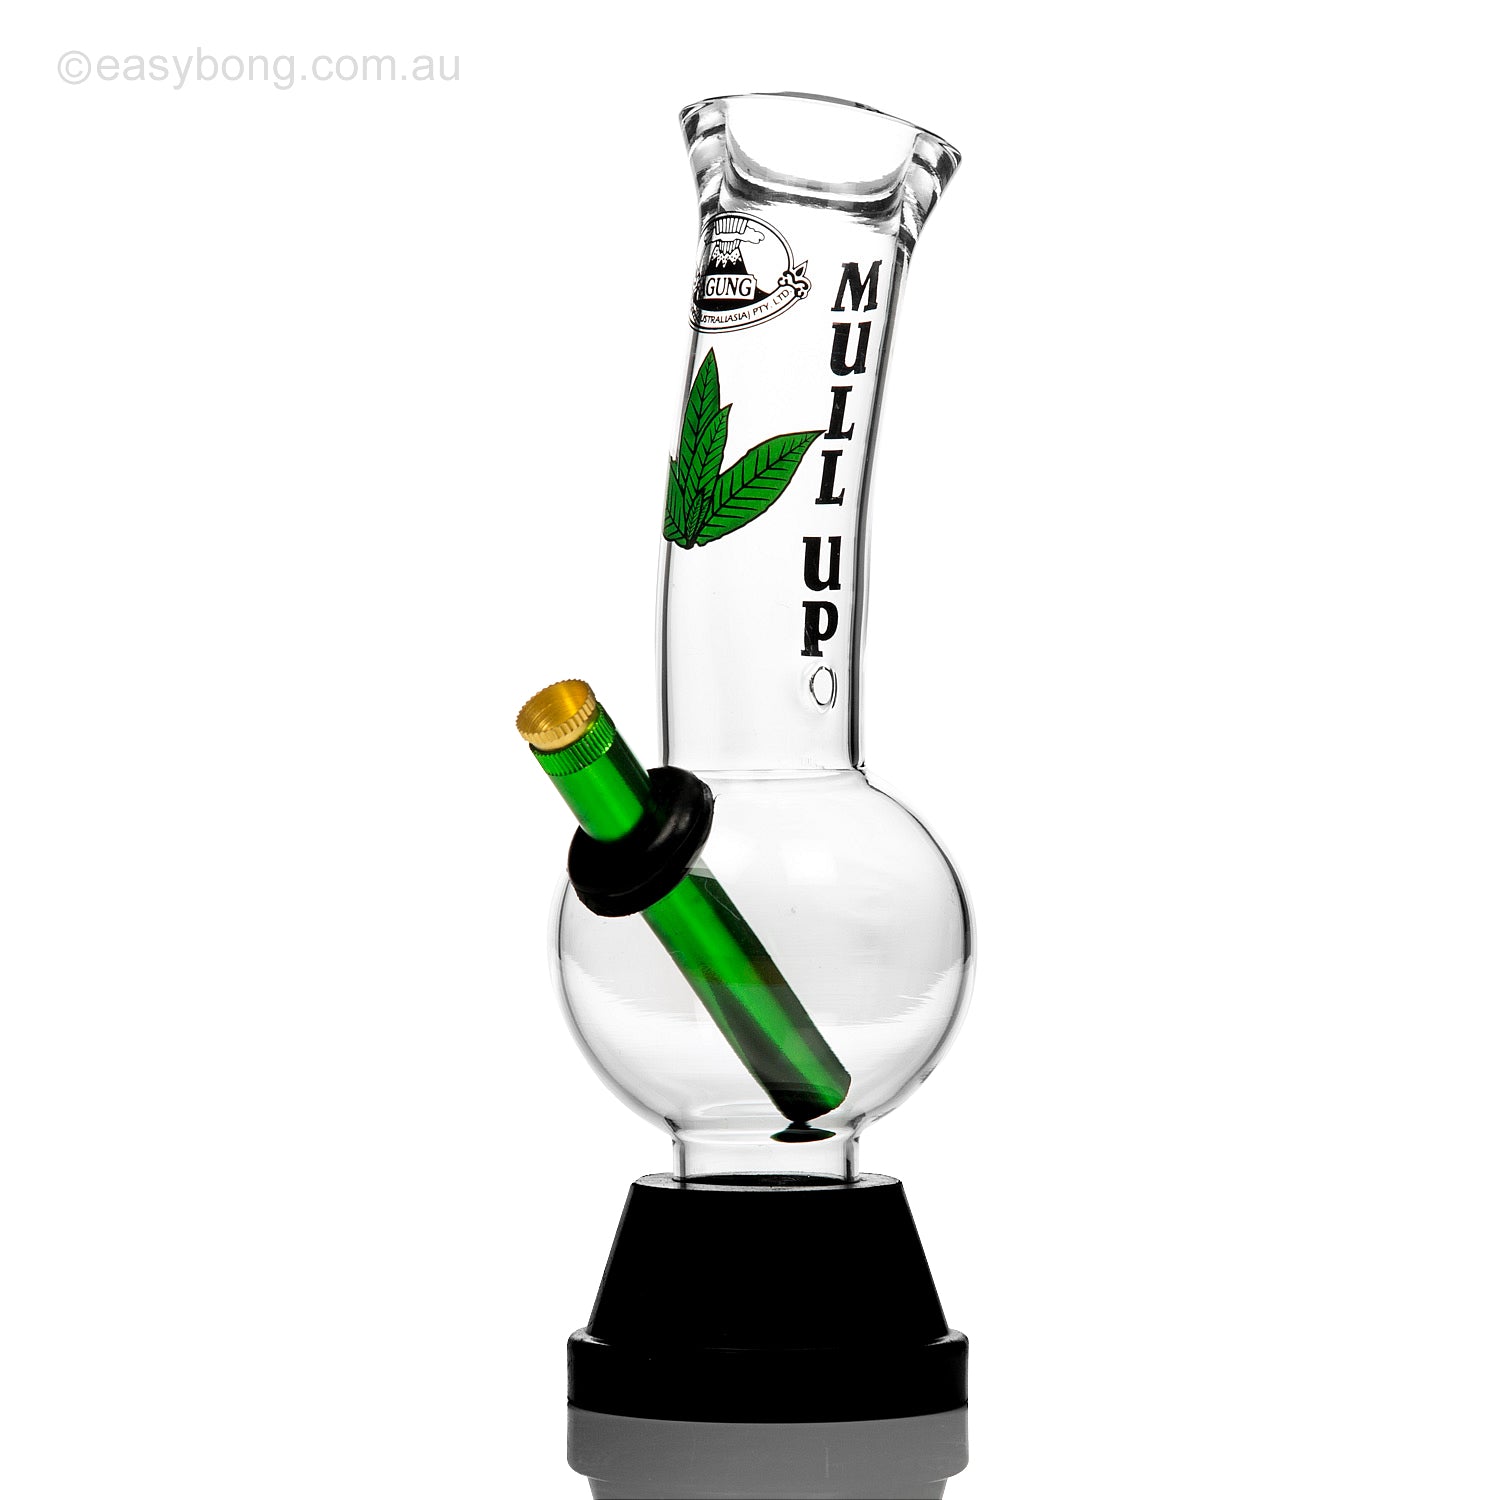 25cm Agung bong with marijuana leaf decal on the neck.